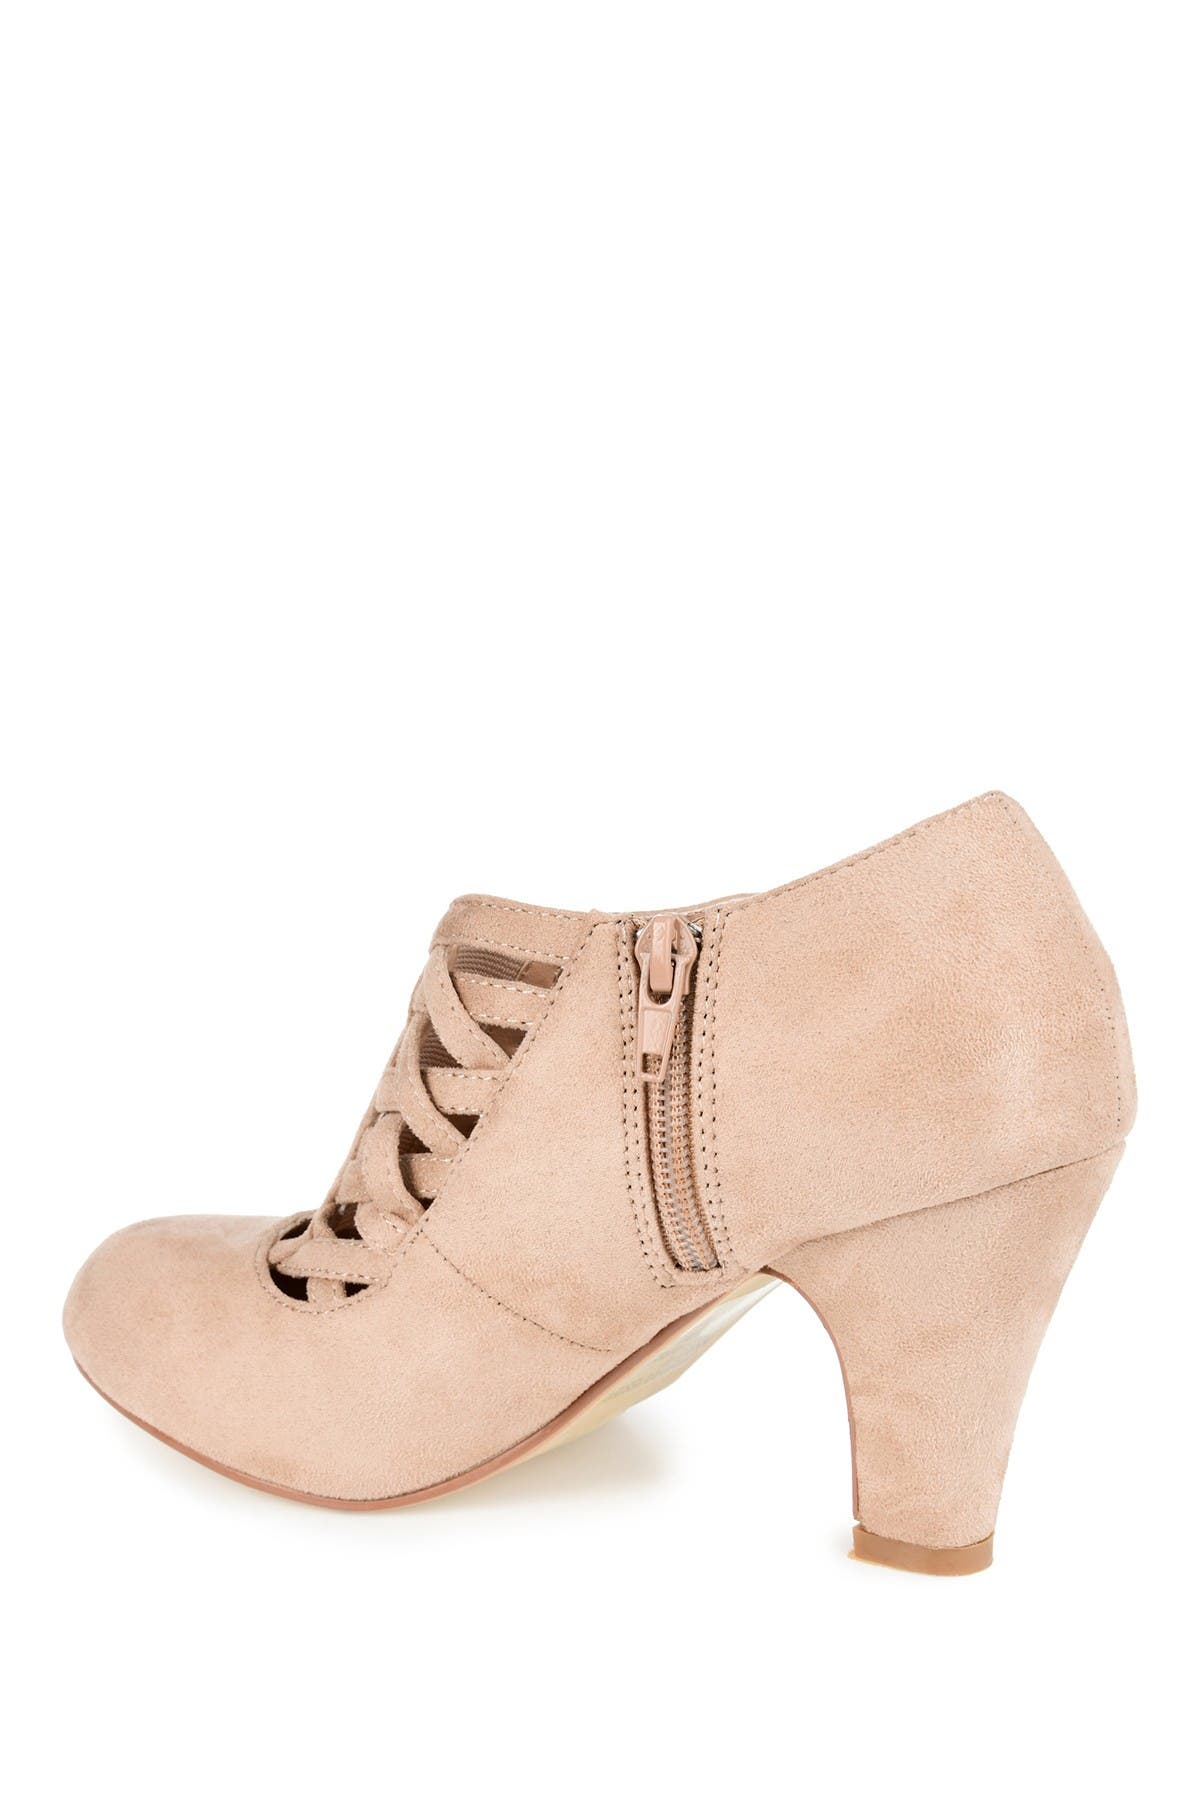 Journee Collection Piper Caged Ankle Bootie In Medium Beige